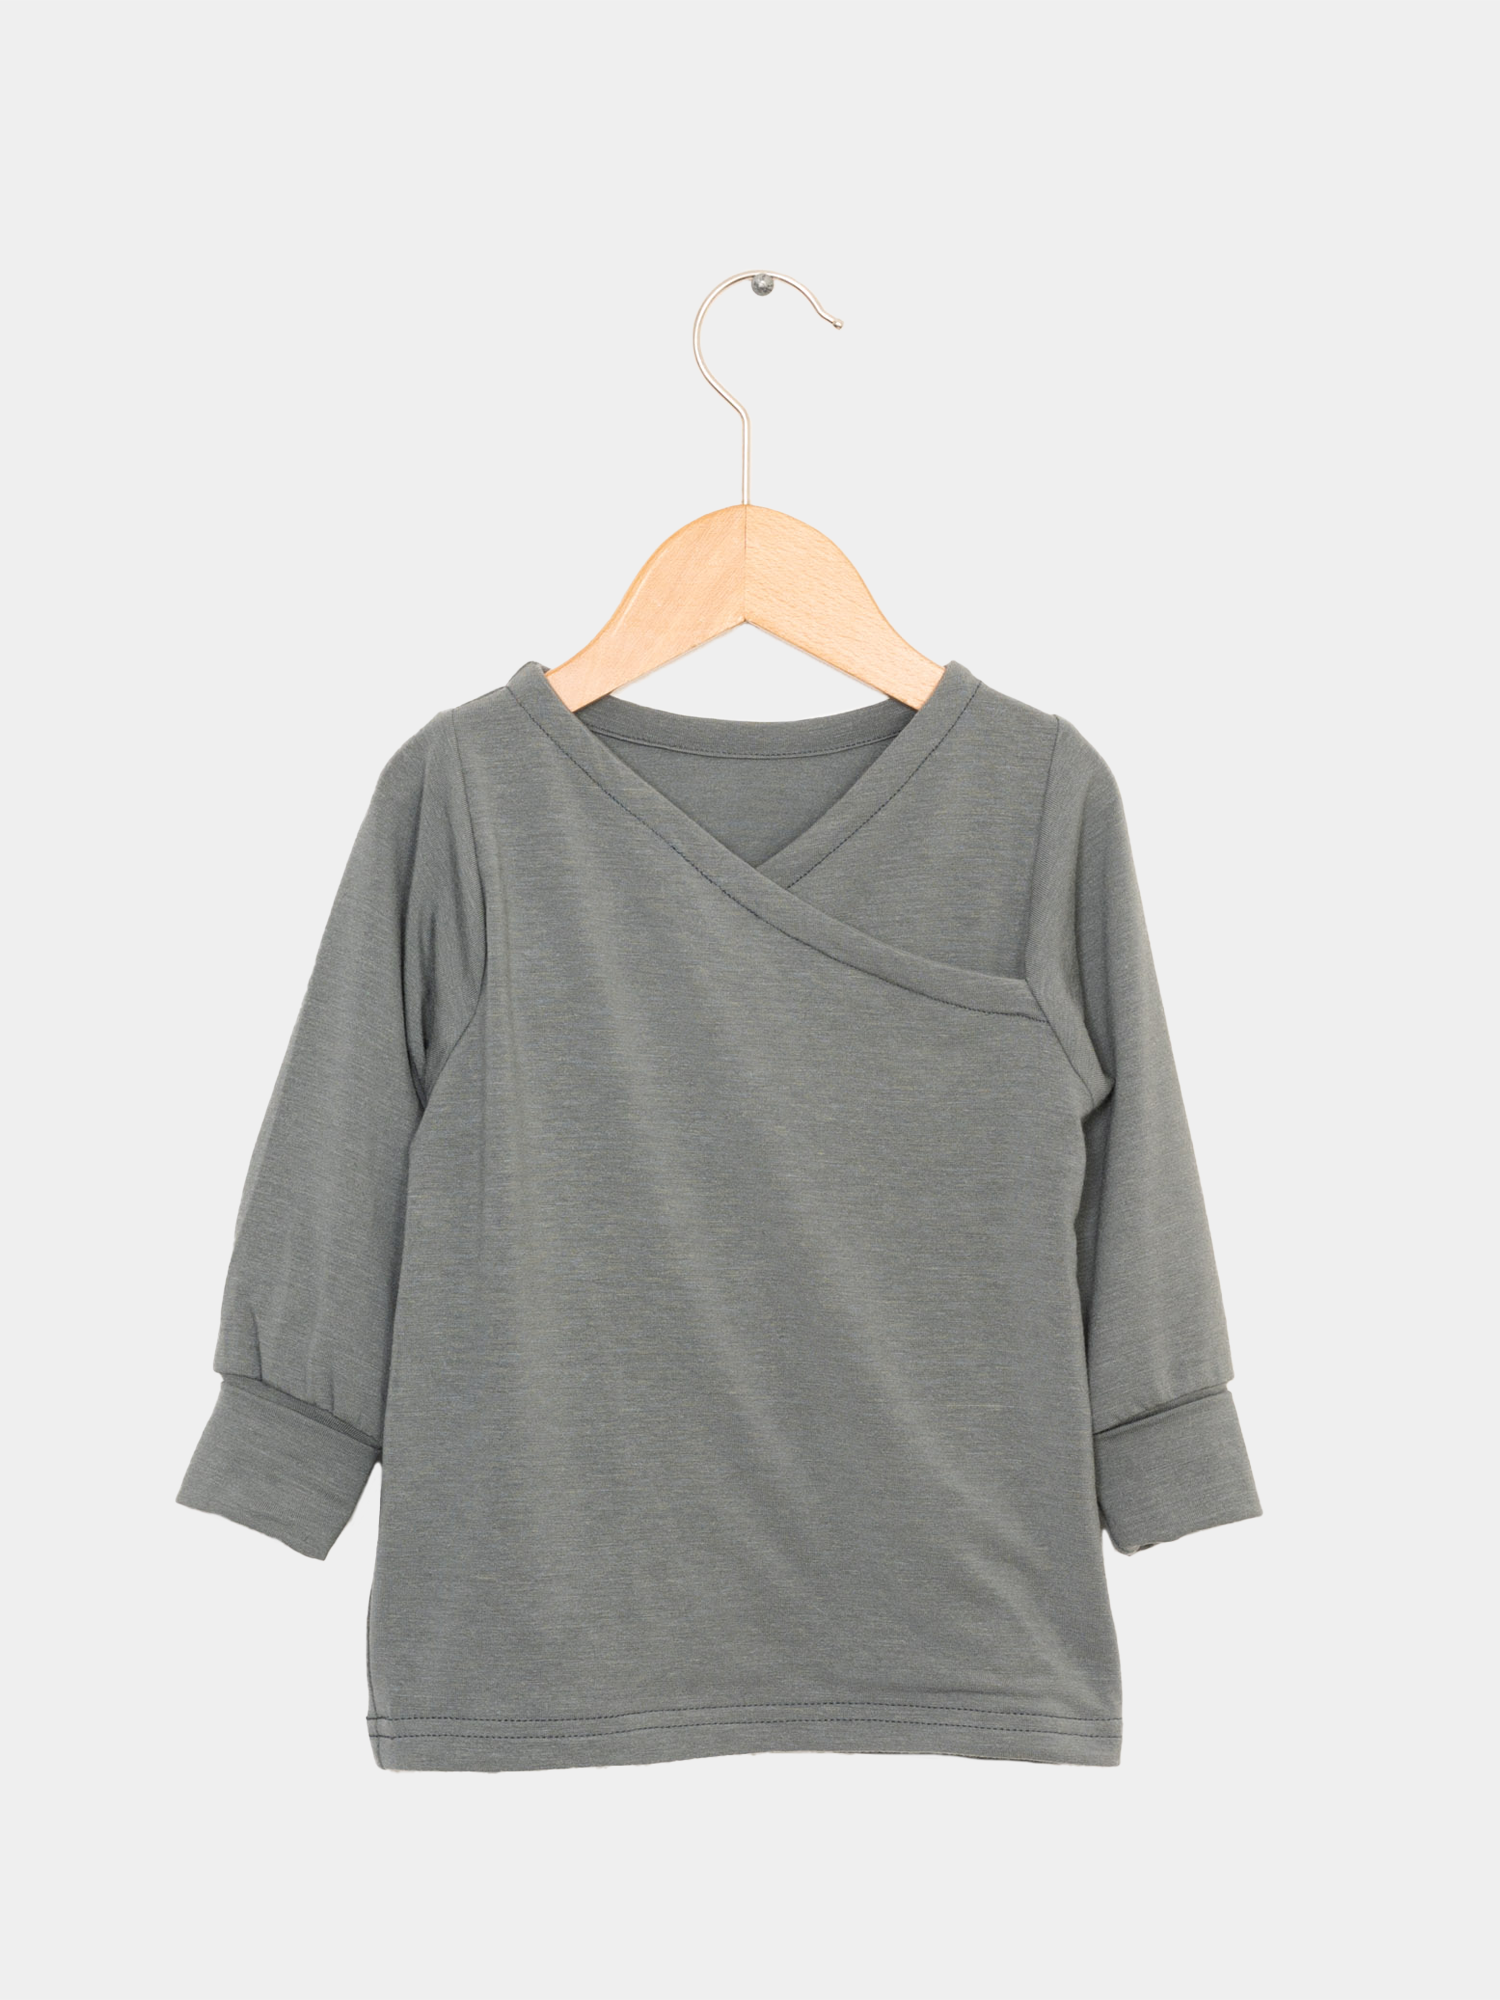 Wrap shirt in cashmere blend - dove